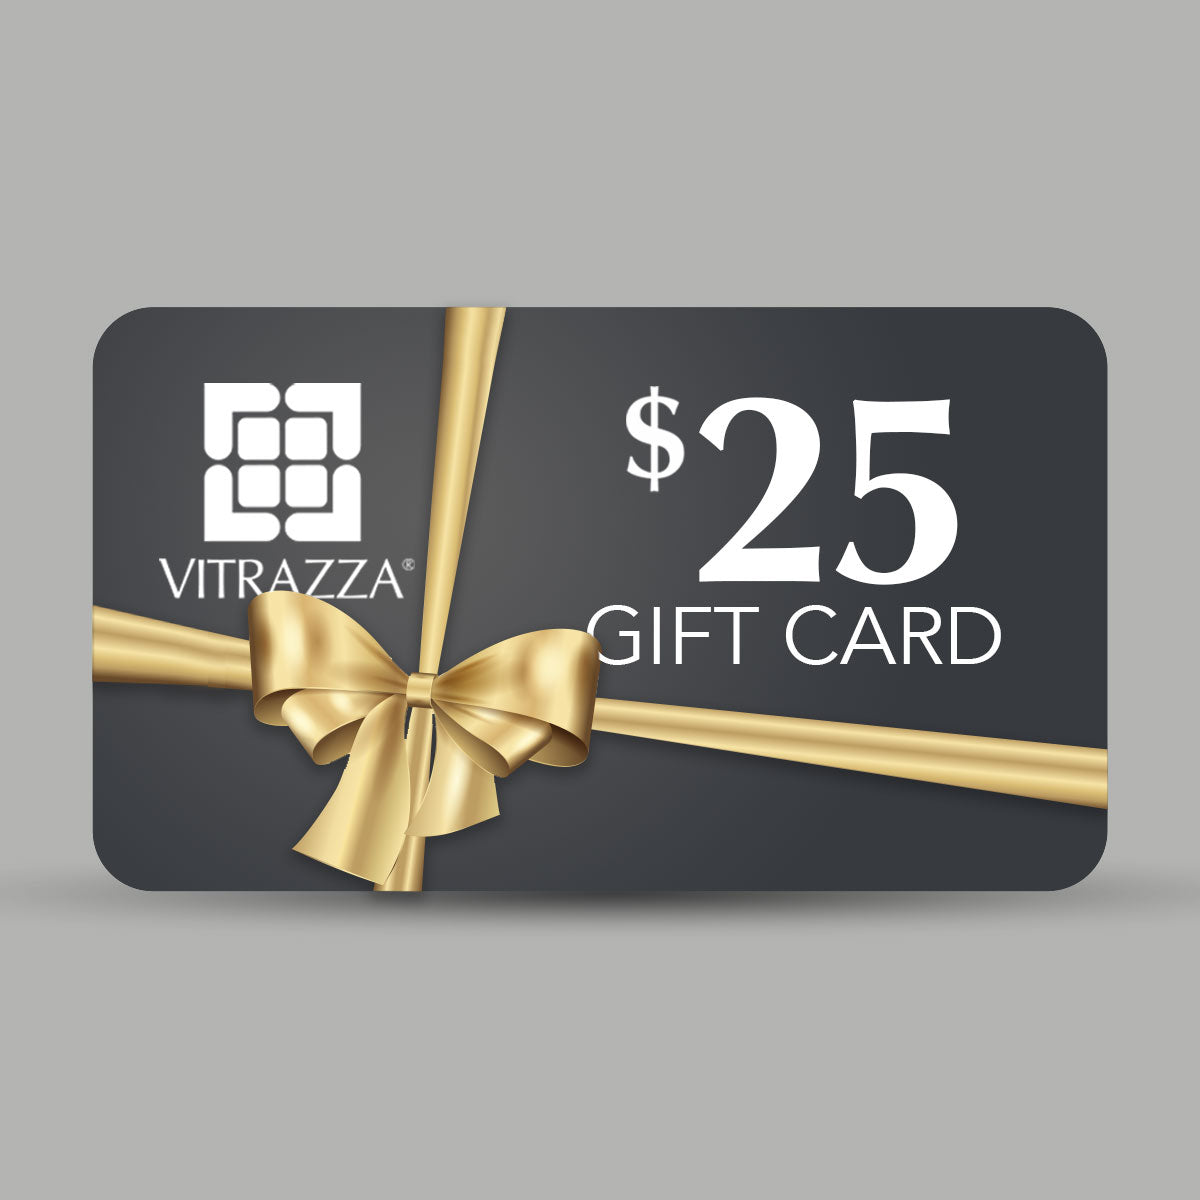 variant_title: Gift Card | Size: $25.00 USD :: alt_text: